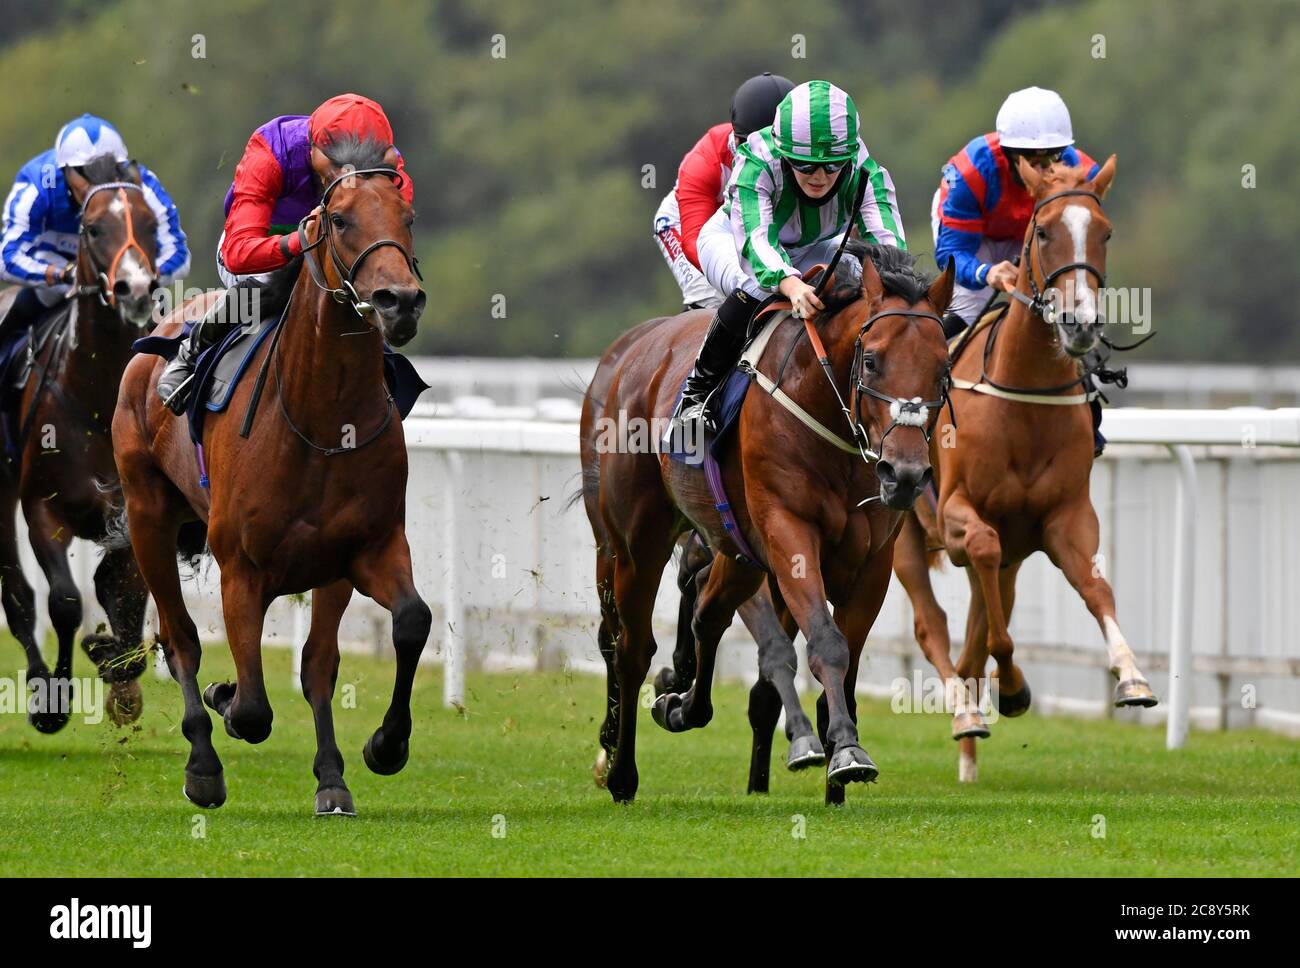 Saffie Osborne on board Hot Scoop wins the British EBF Novice Stakes at Royal Windsor Racecourse. Stock Photo